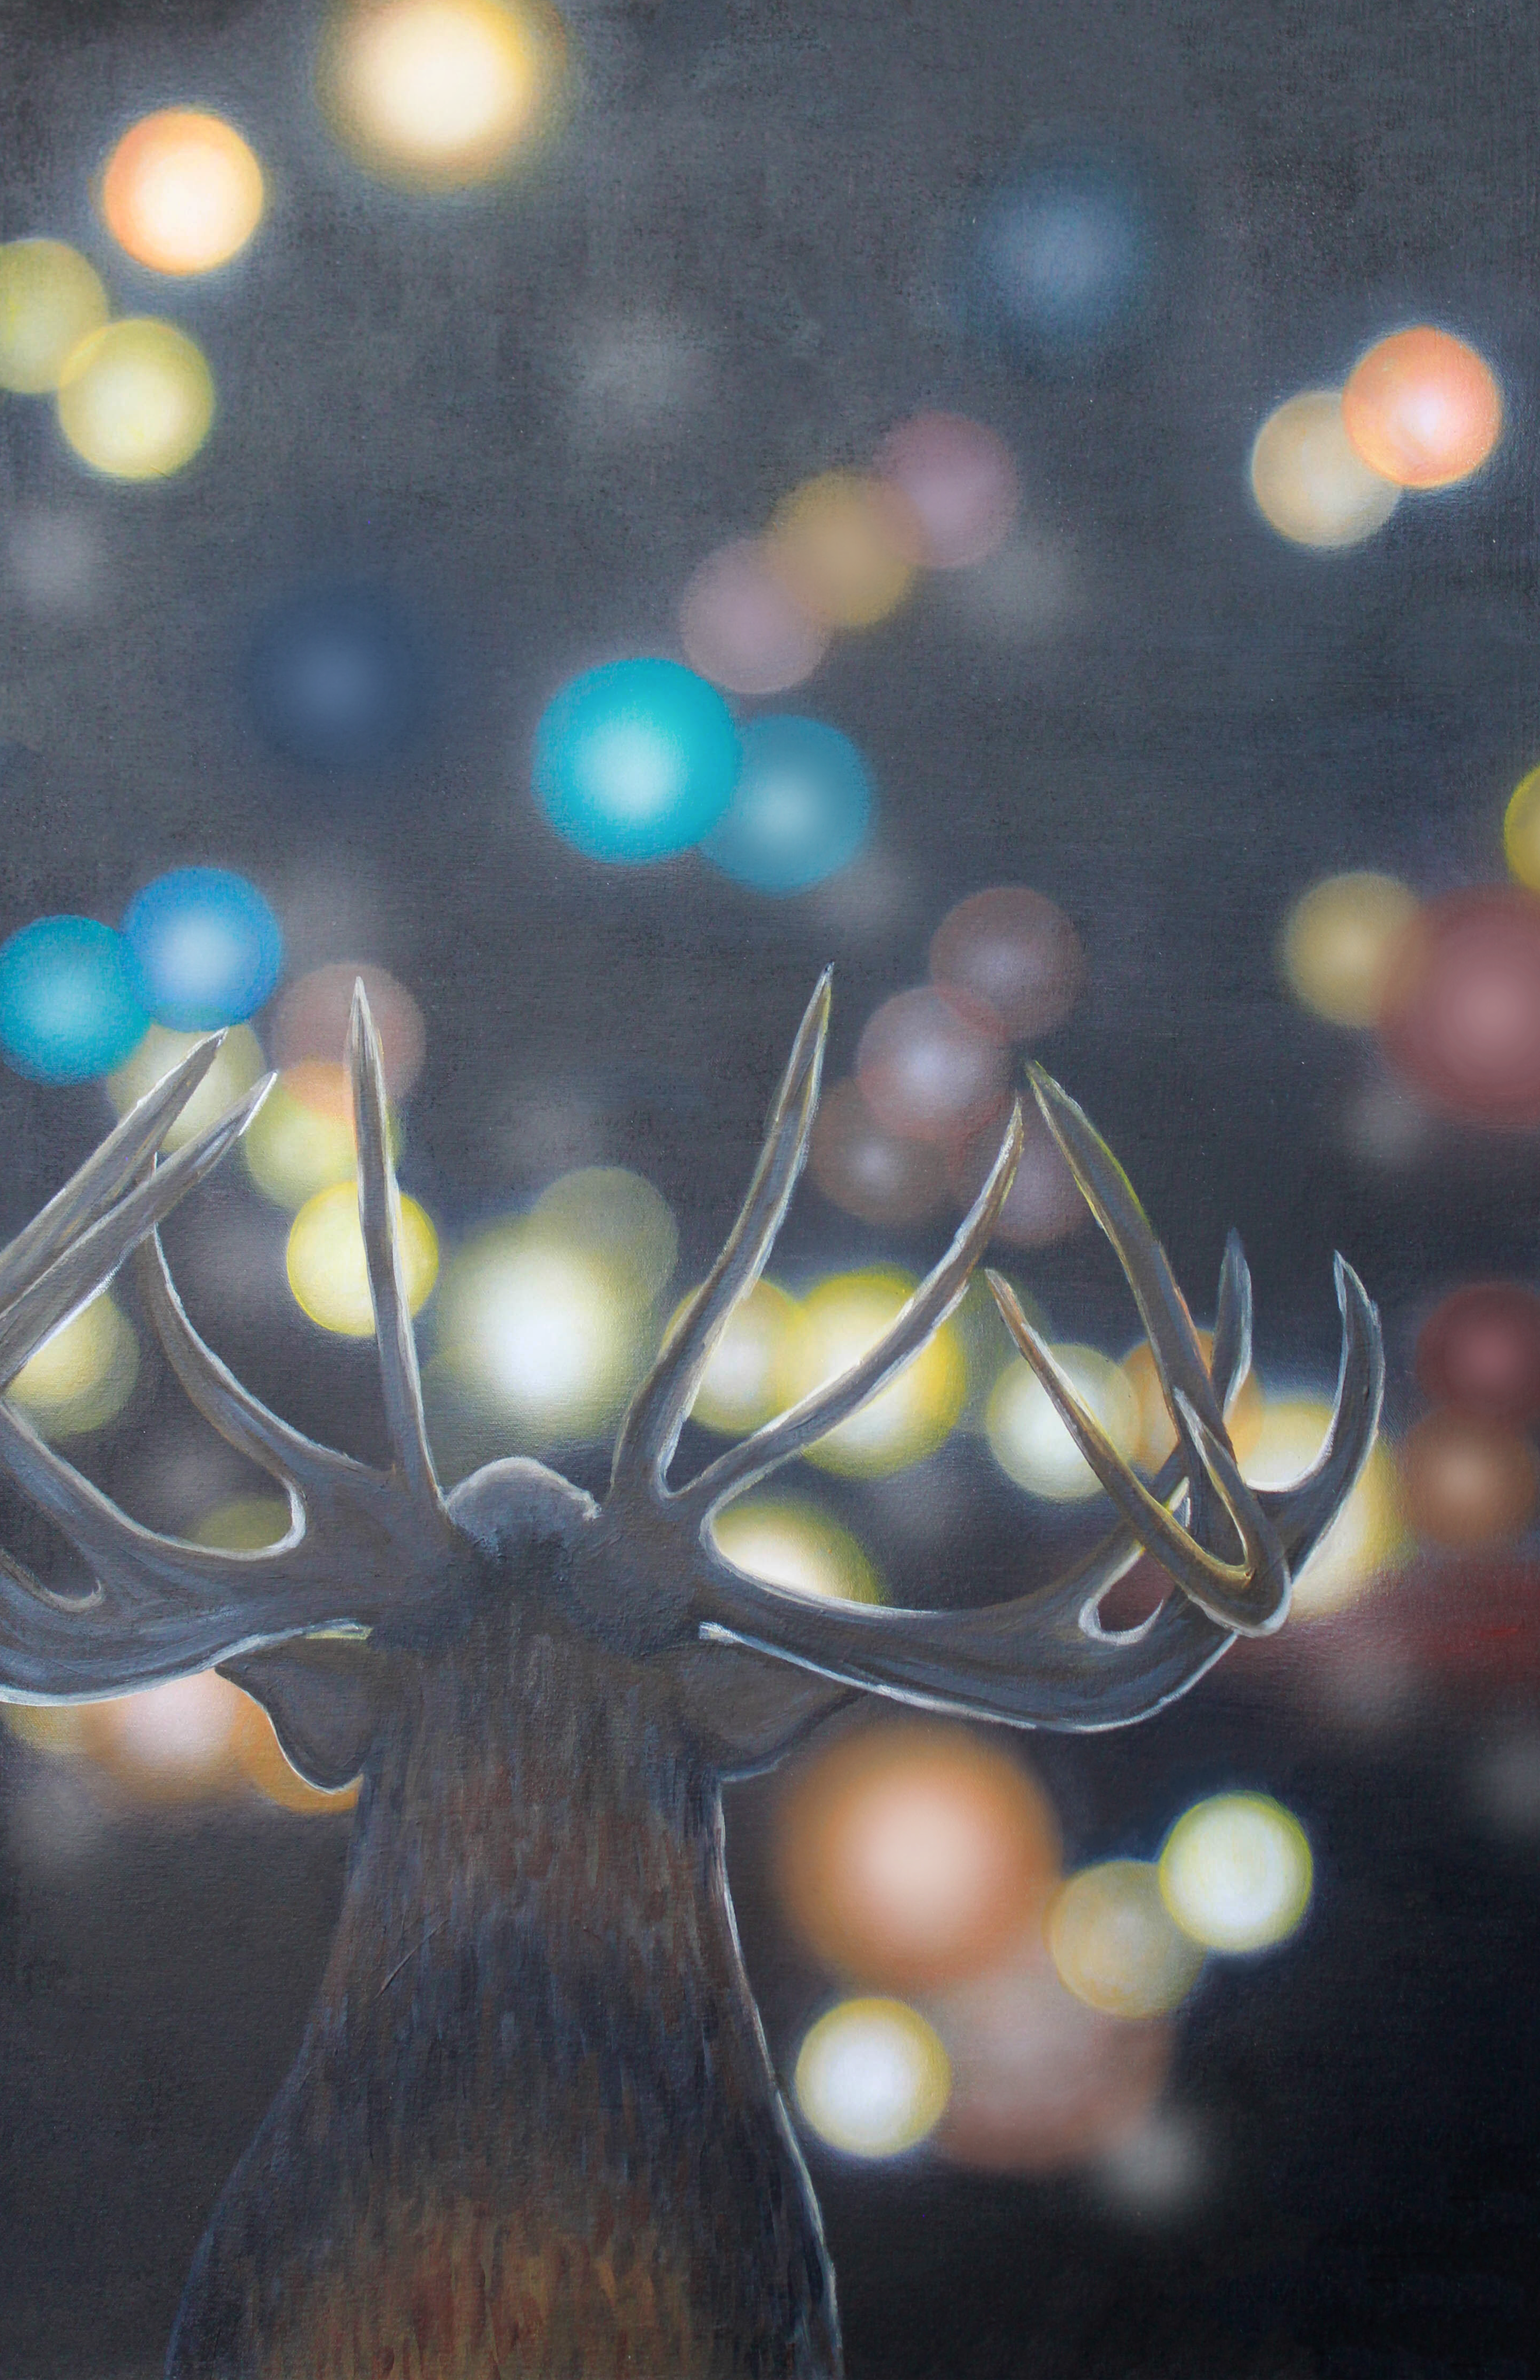 acrylic and airbrush painting of a deer looking into incoming traffic with a bokeh style painting